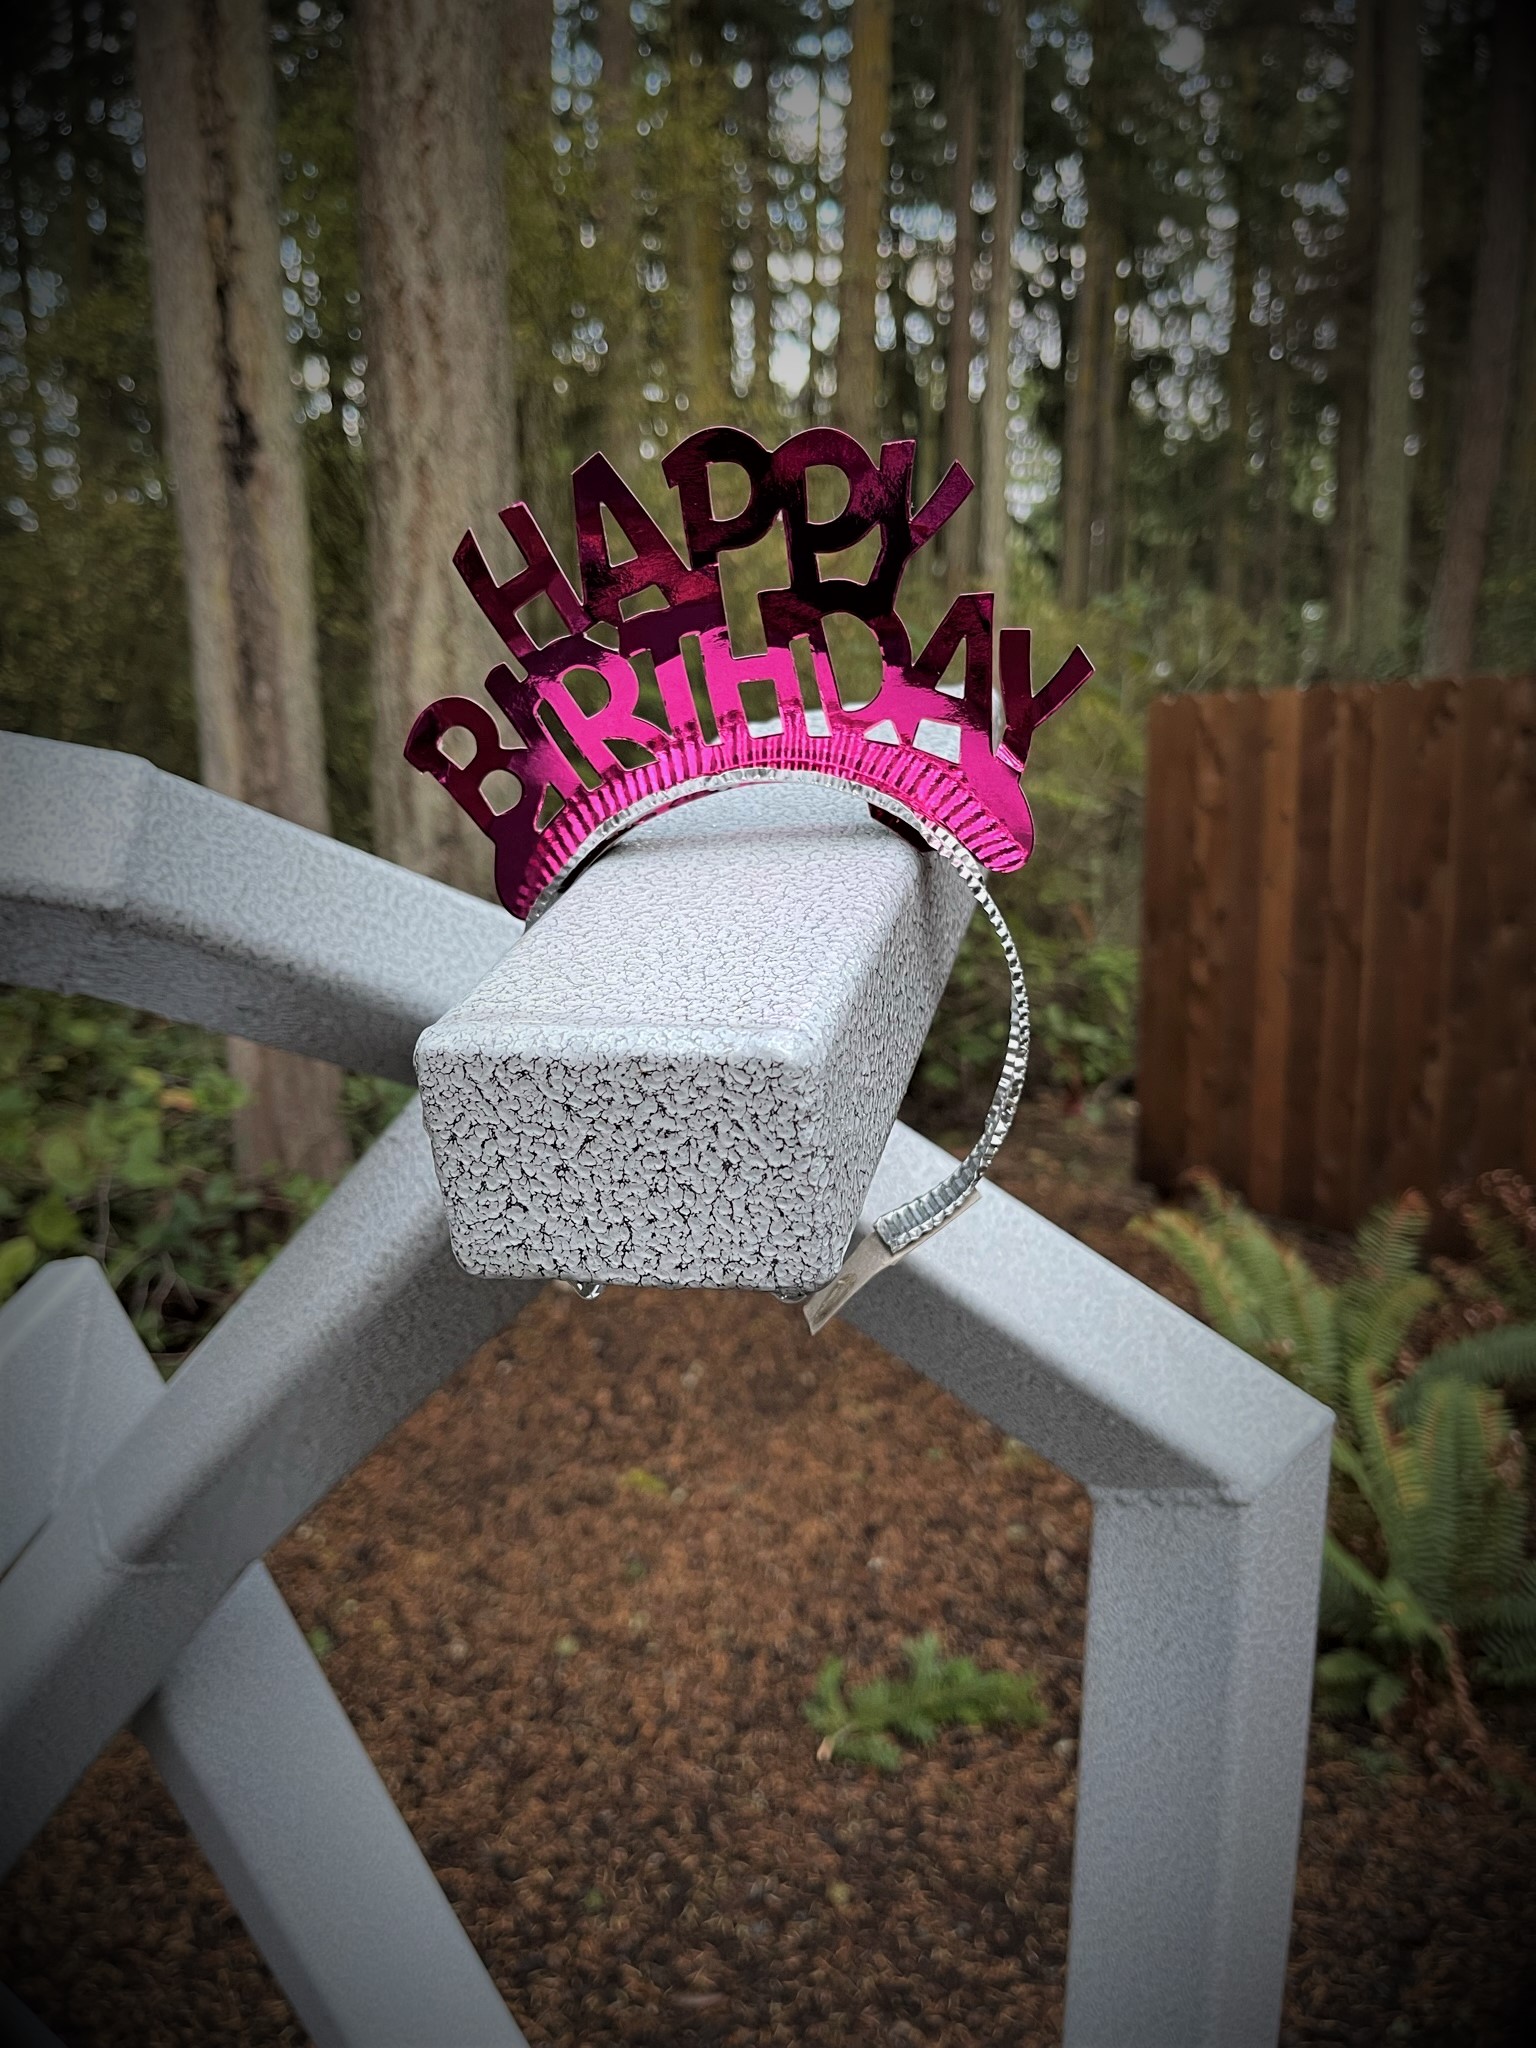 Happy 2nd Birthday to Price Sculpture Forest